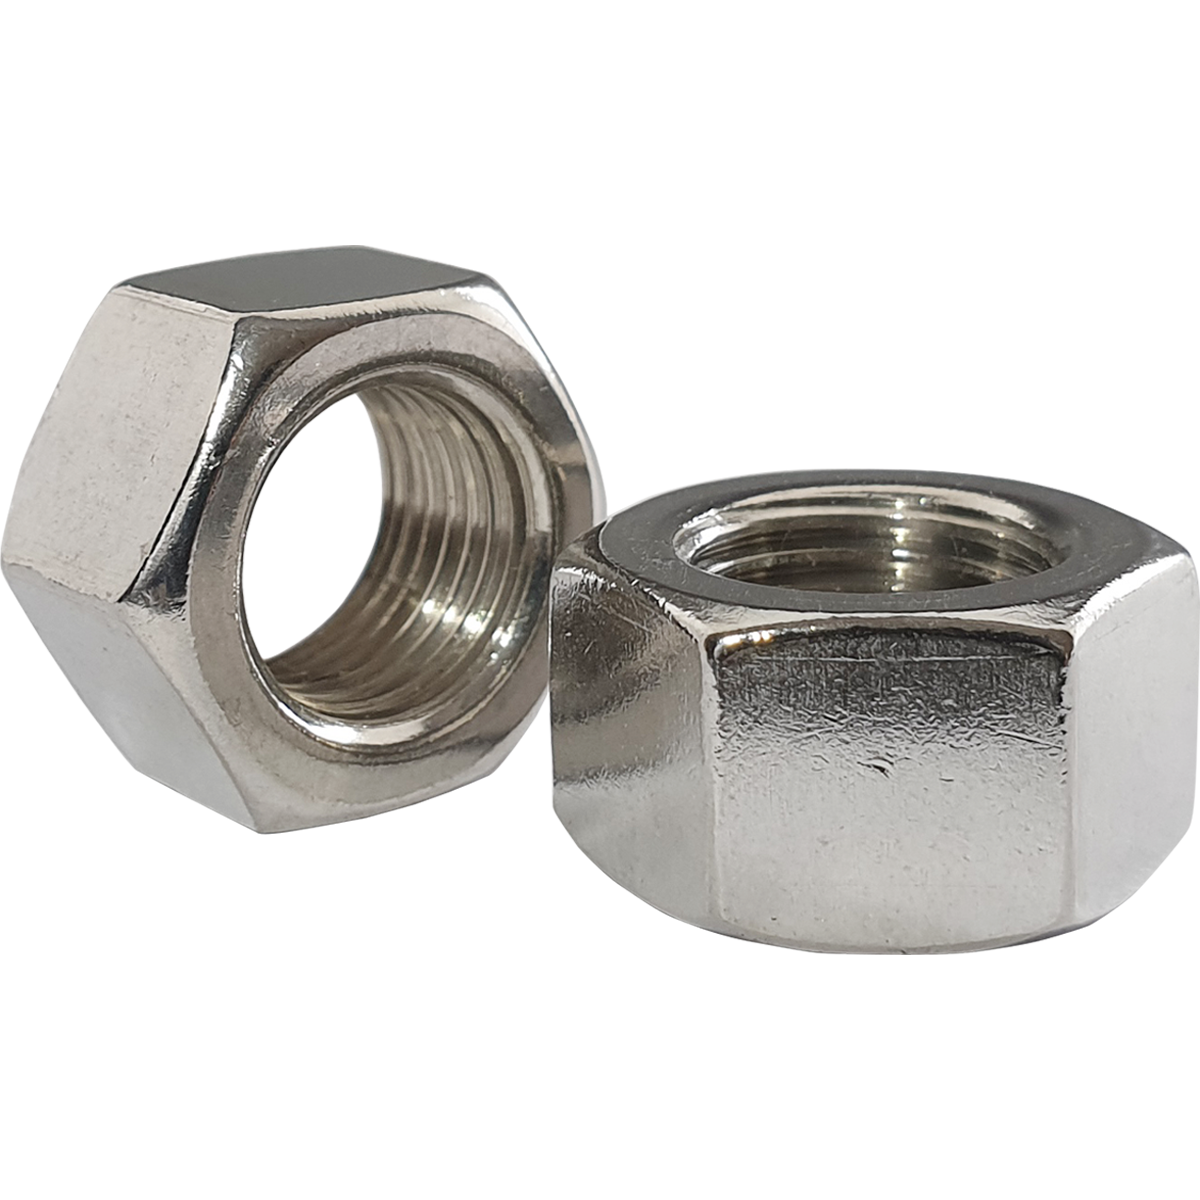 UNF - A2 stainless steel hex nuts. Corrosion resistance and at competitive prices with bulk discounts available across the range at Fusion Fixings.